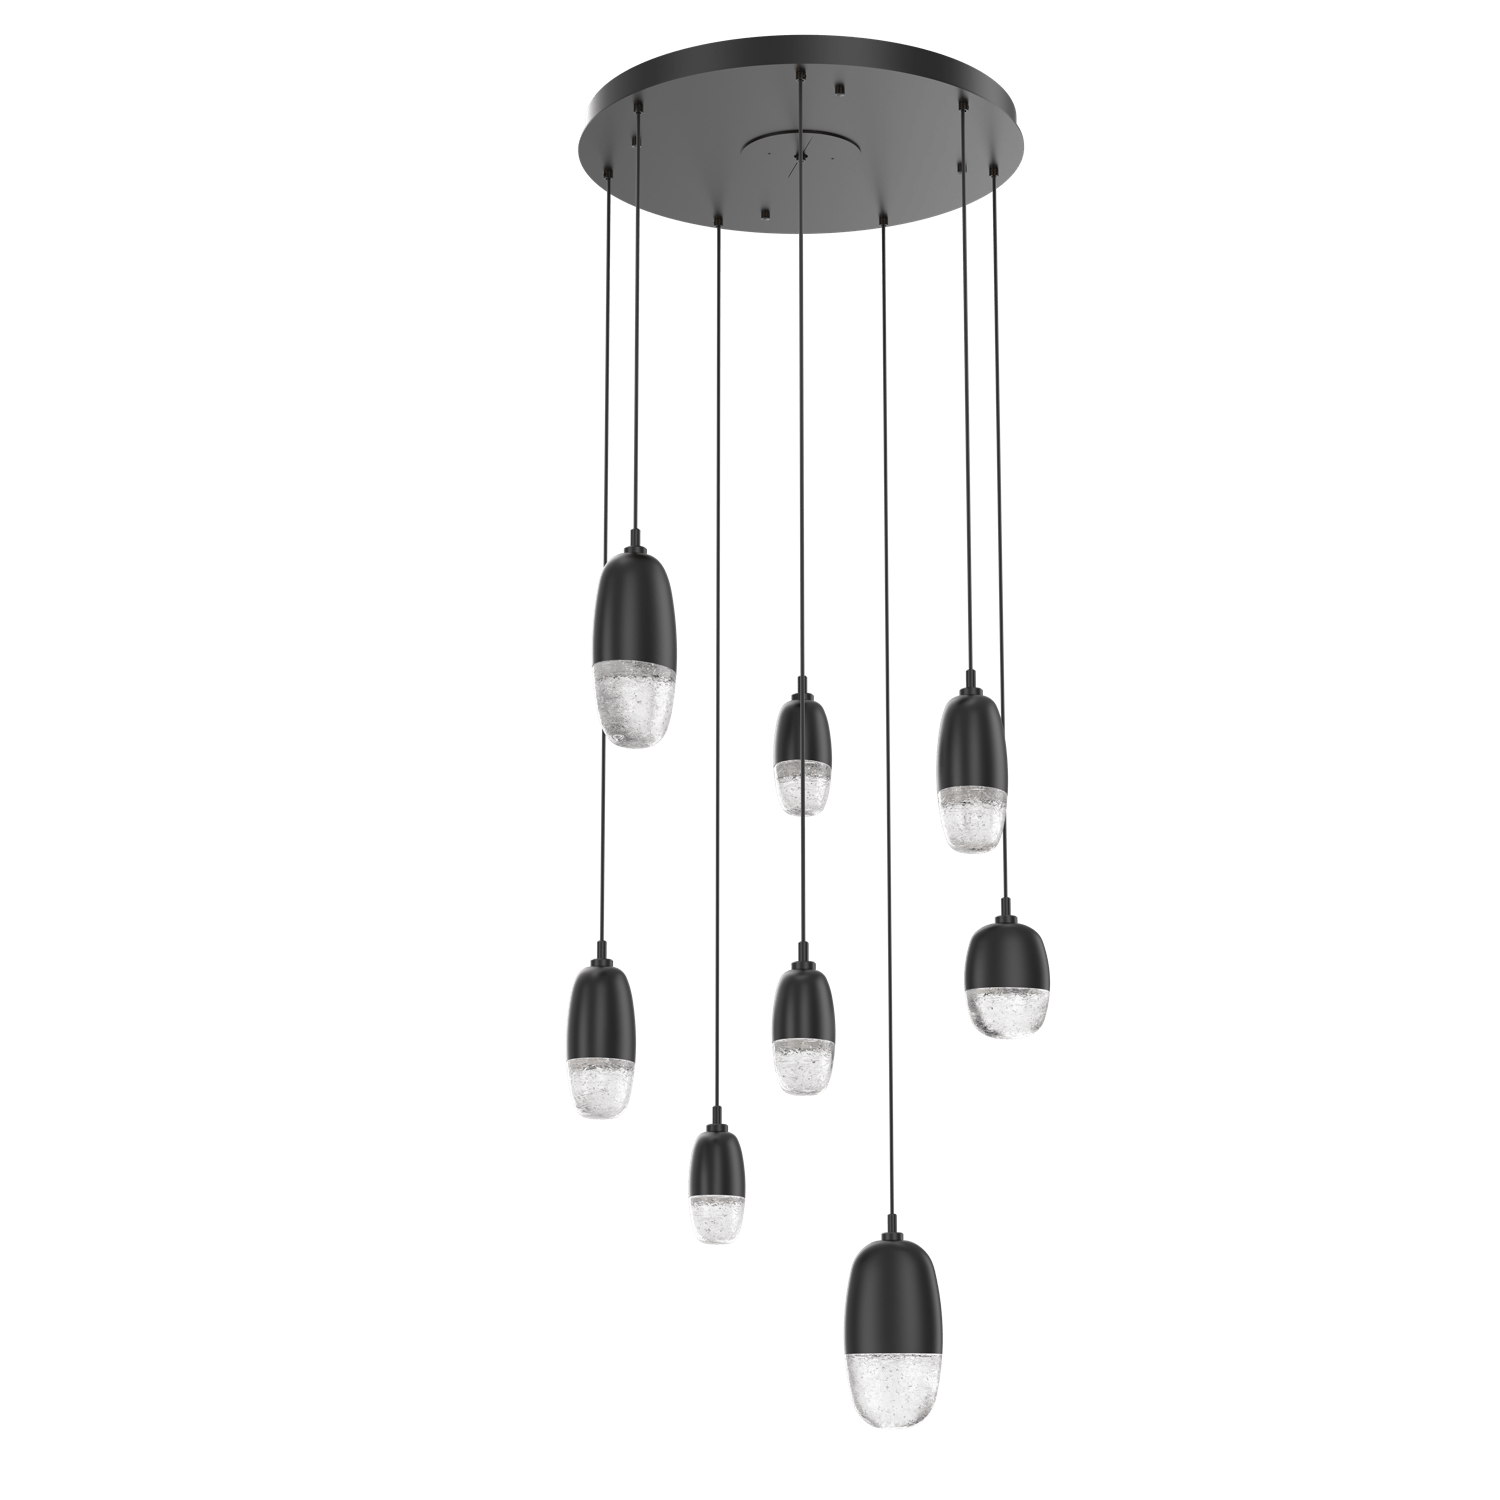 CHB0079-08-MB-Hammerton-Studio-Pebble-8-light-round-pendant-chandelier-with-matte-black-finish-and-clear-cast-glass-shades-and-LED-lamping